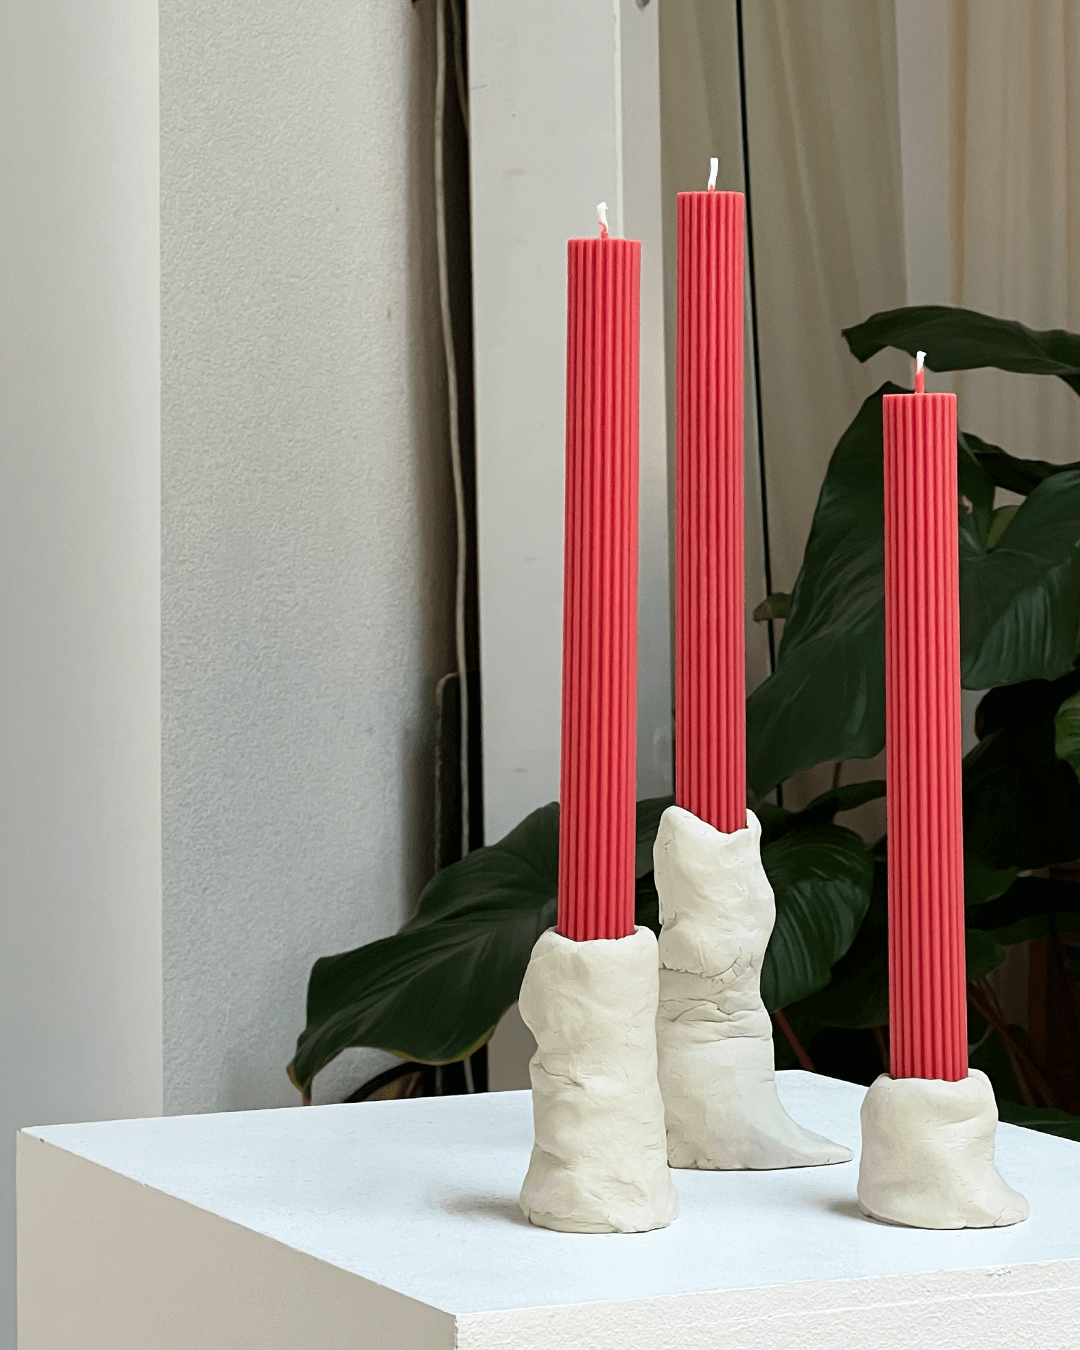 The Rylie candles come in a set of 2 and are made by Bern based label Noosh Studio in collaboration with Clayeria. The Rylies make the perfect decoration for a fine table or on your coffee table. The candles come in the three signature Clayeria colors.